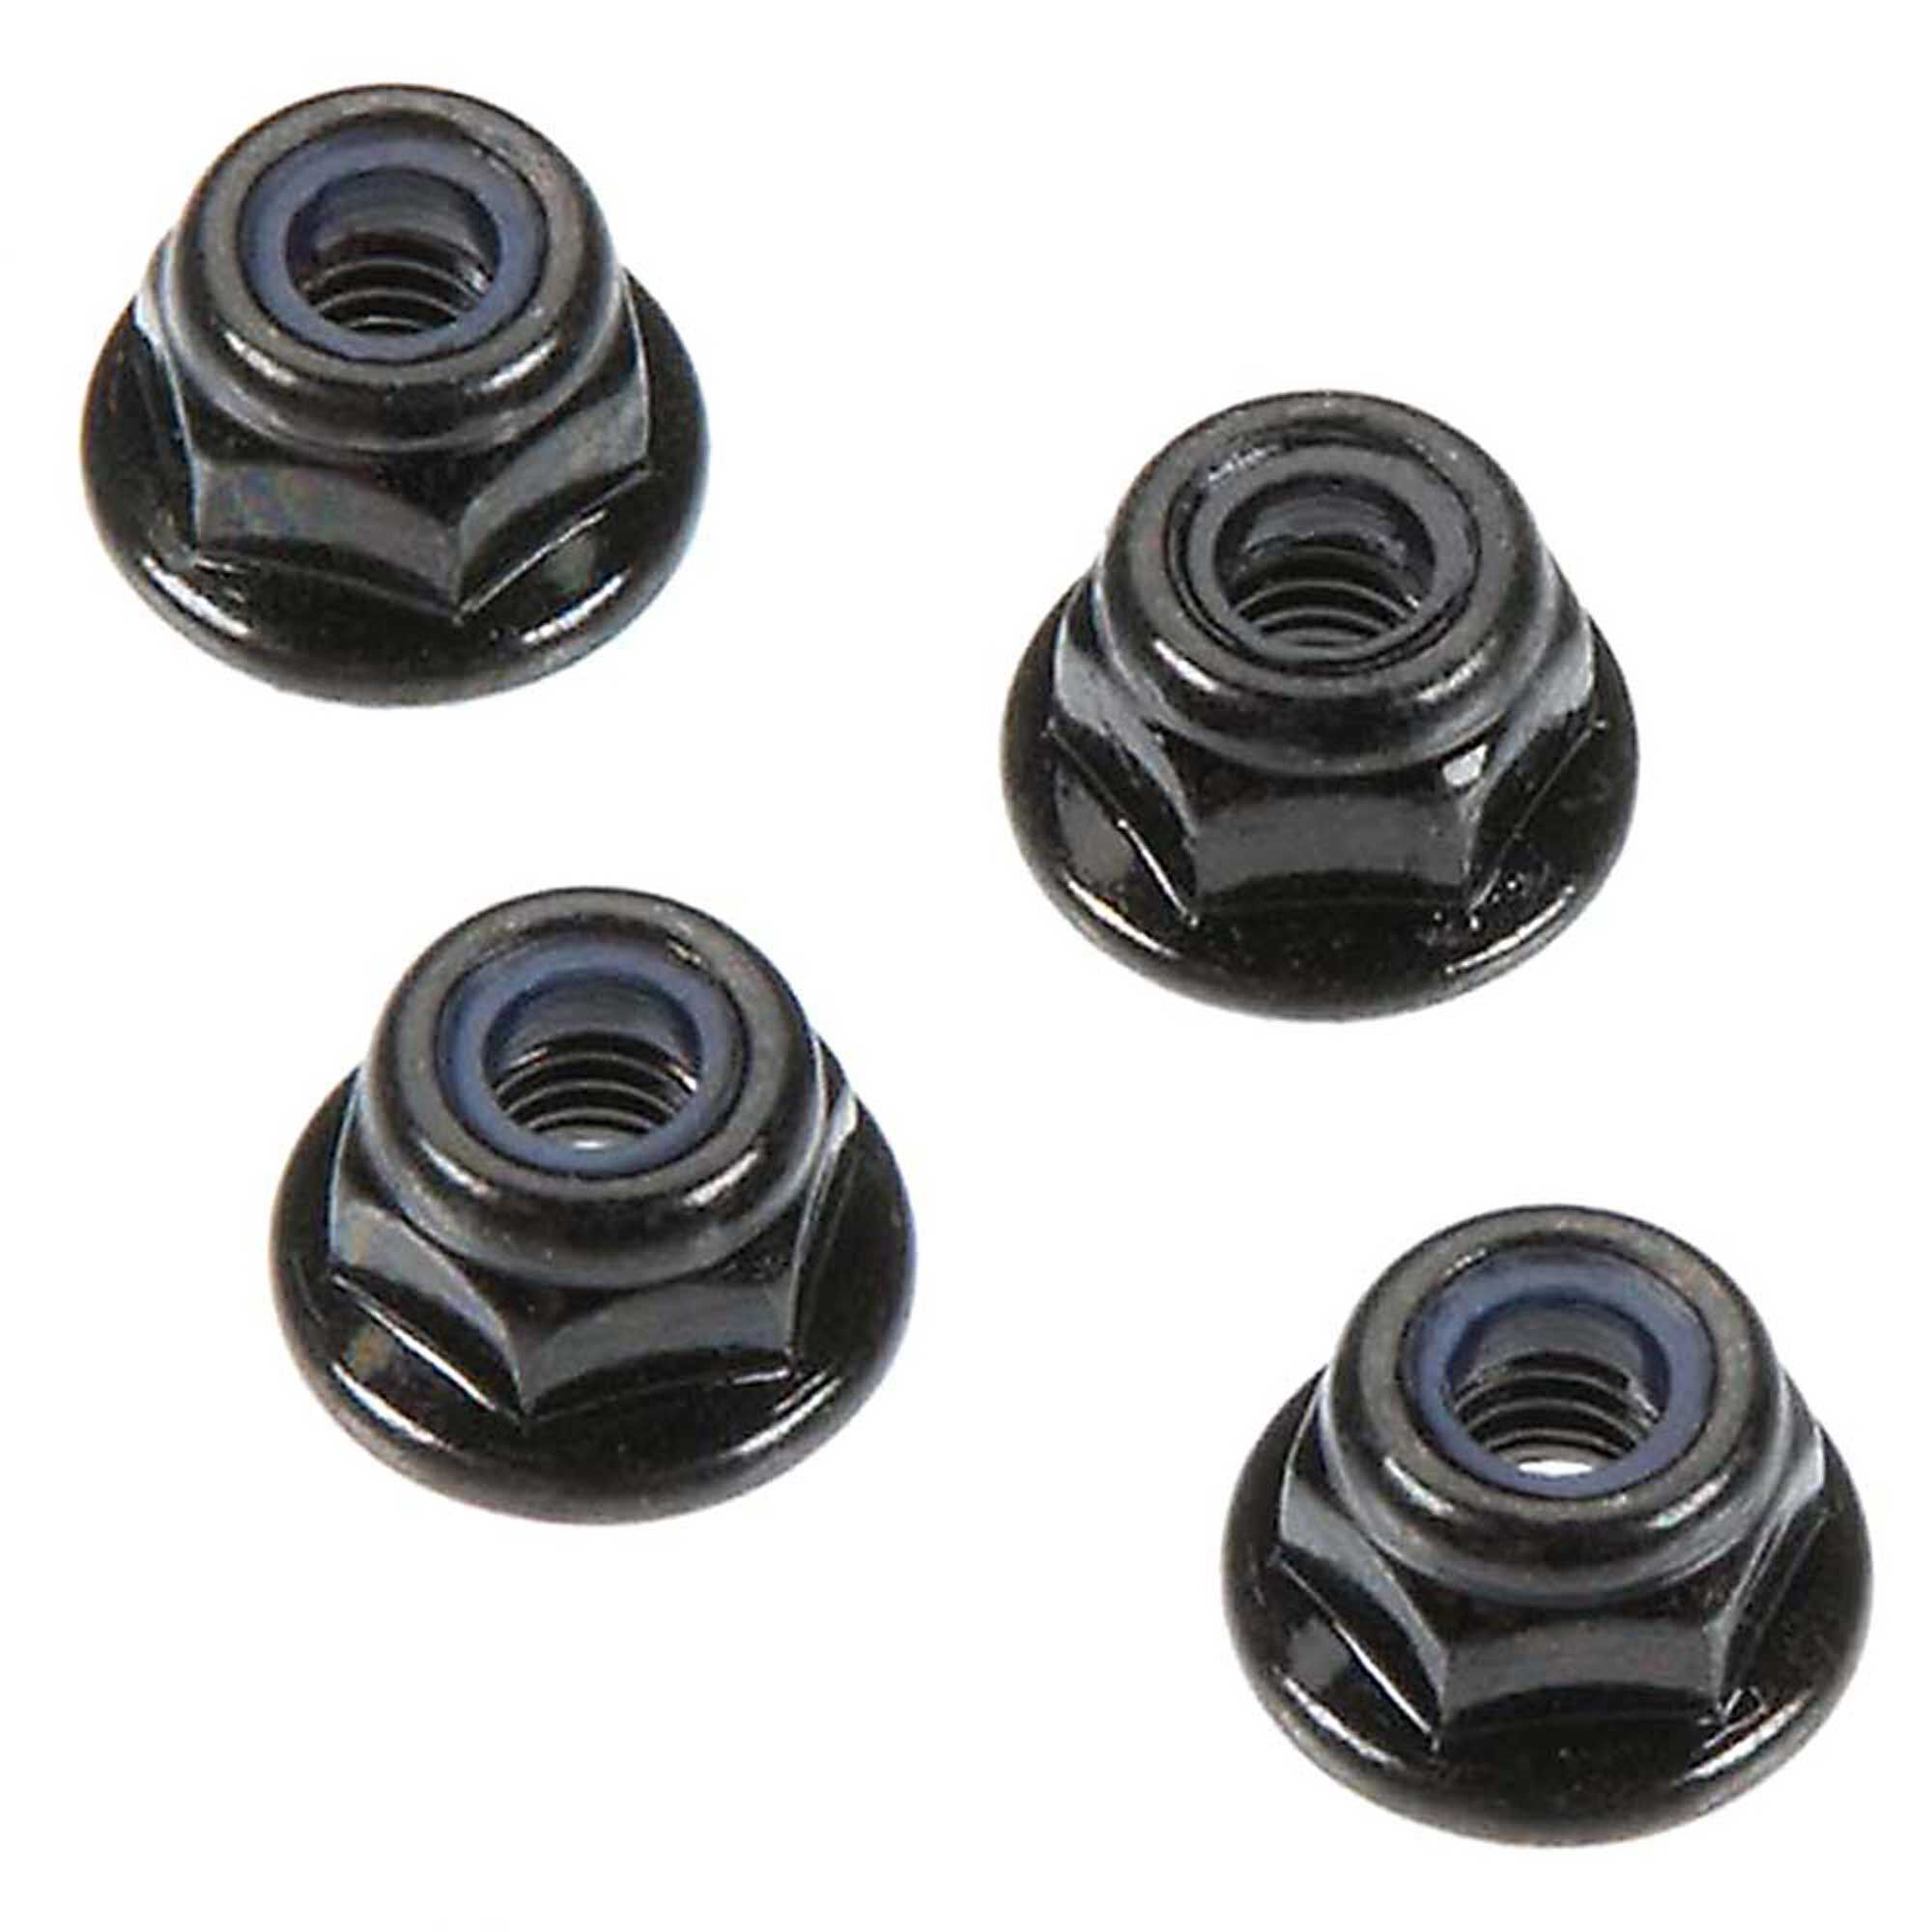 Gold GDOOL 8PCS Flange M4 Lock Nuts Serrated Nylon Self-Tightening Aluminum M4 Wheel Hardware for Axial HPI TLR ECX Model RC Car Vehicles Upgraded Replacement Parts 